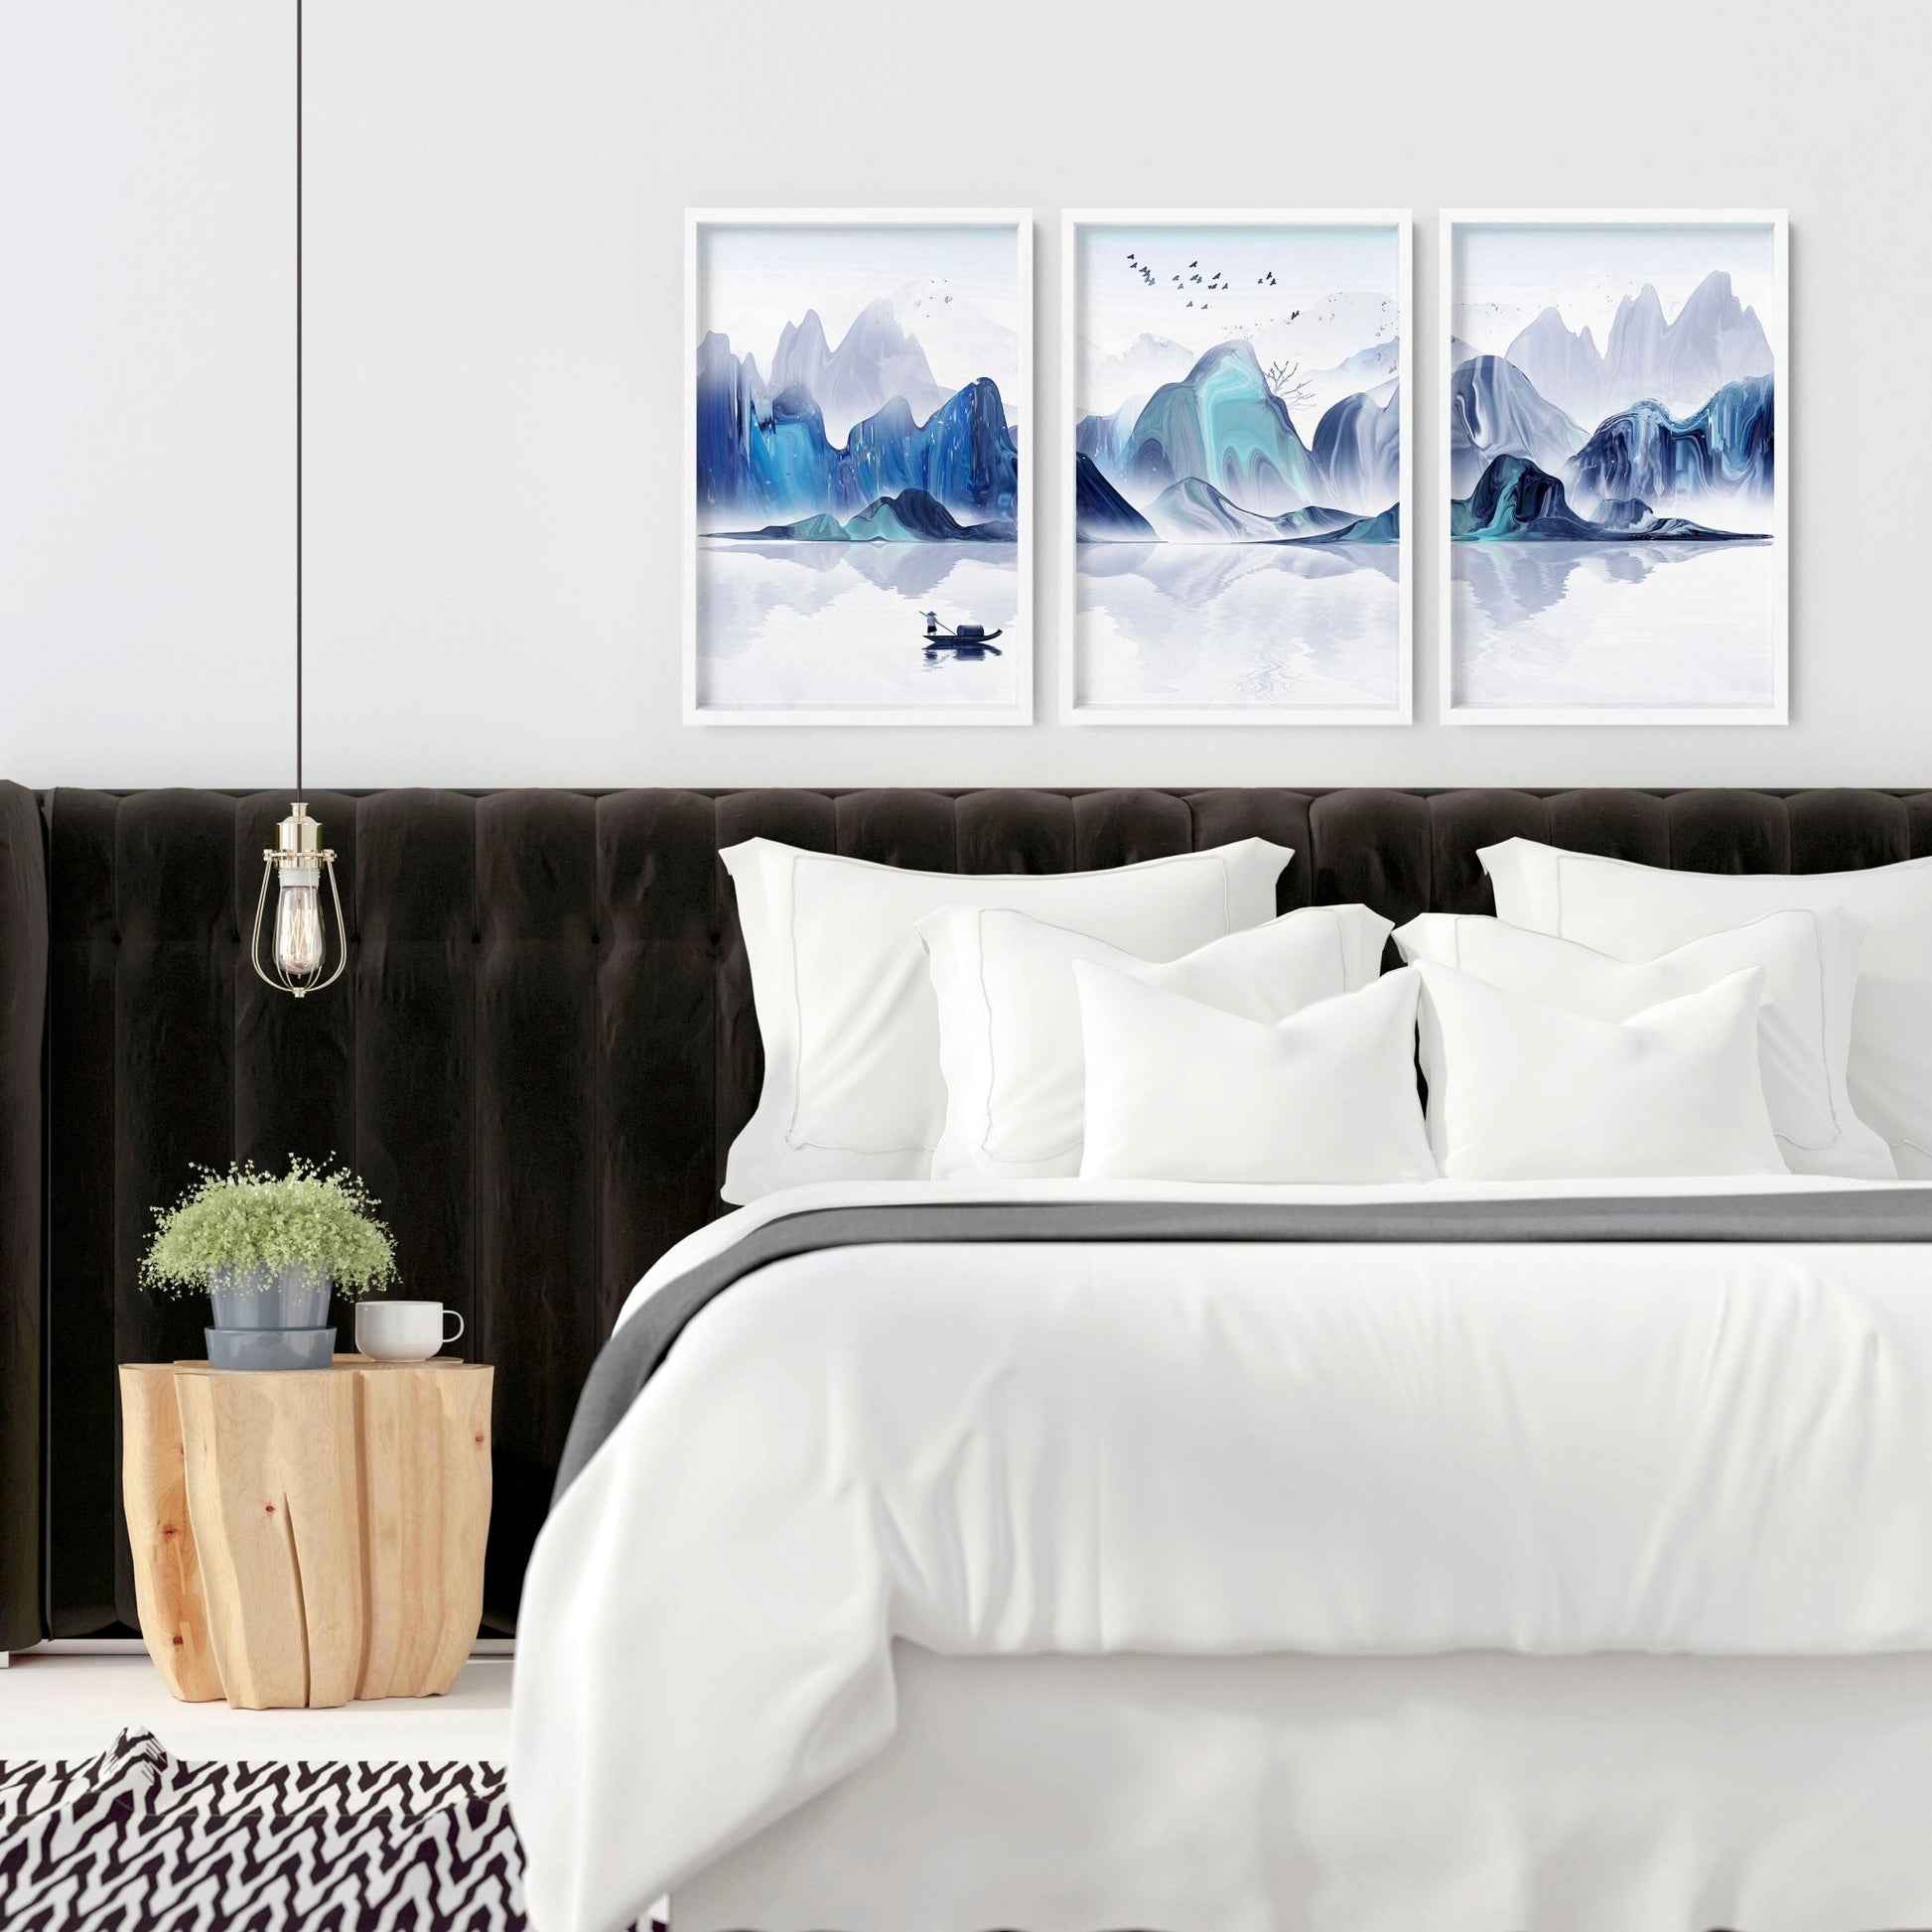 Teal Japanese decor for bedroom | set of 3 wall art prints - About Wall Art